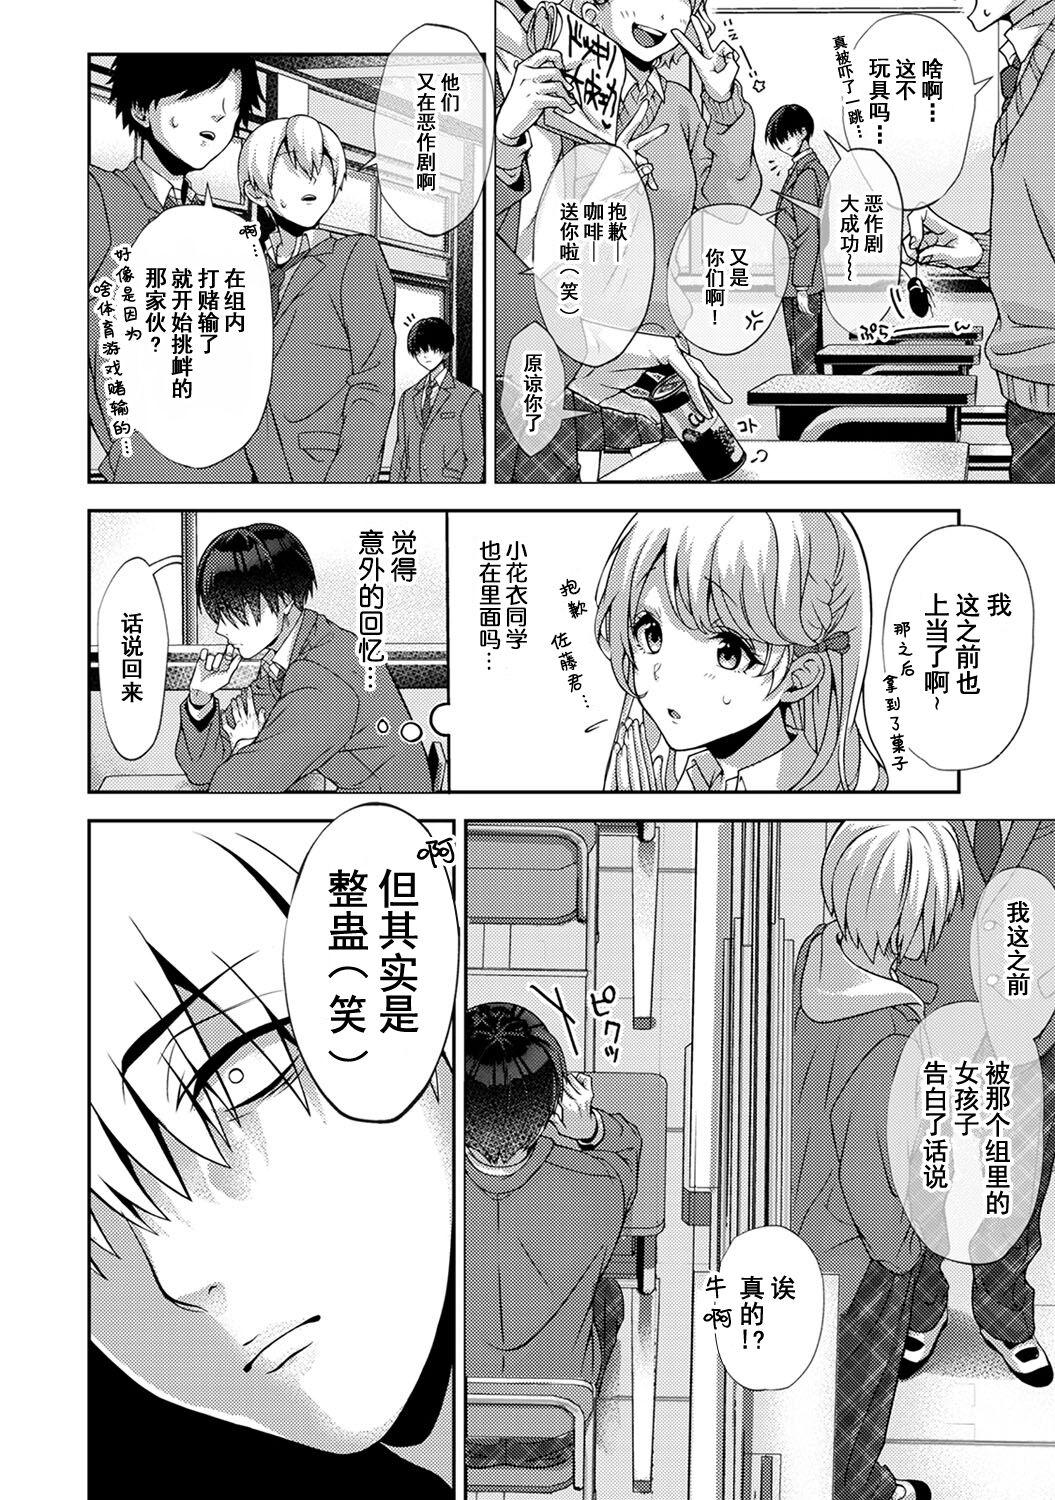 Tight Cunt 俺だけに小悪魔な同級生〜フったら押し倒されました！〜 第一話 Milf - Page 4